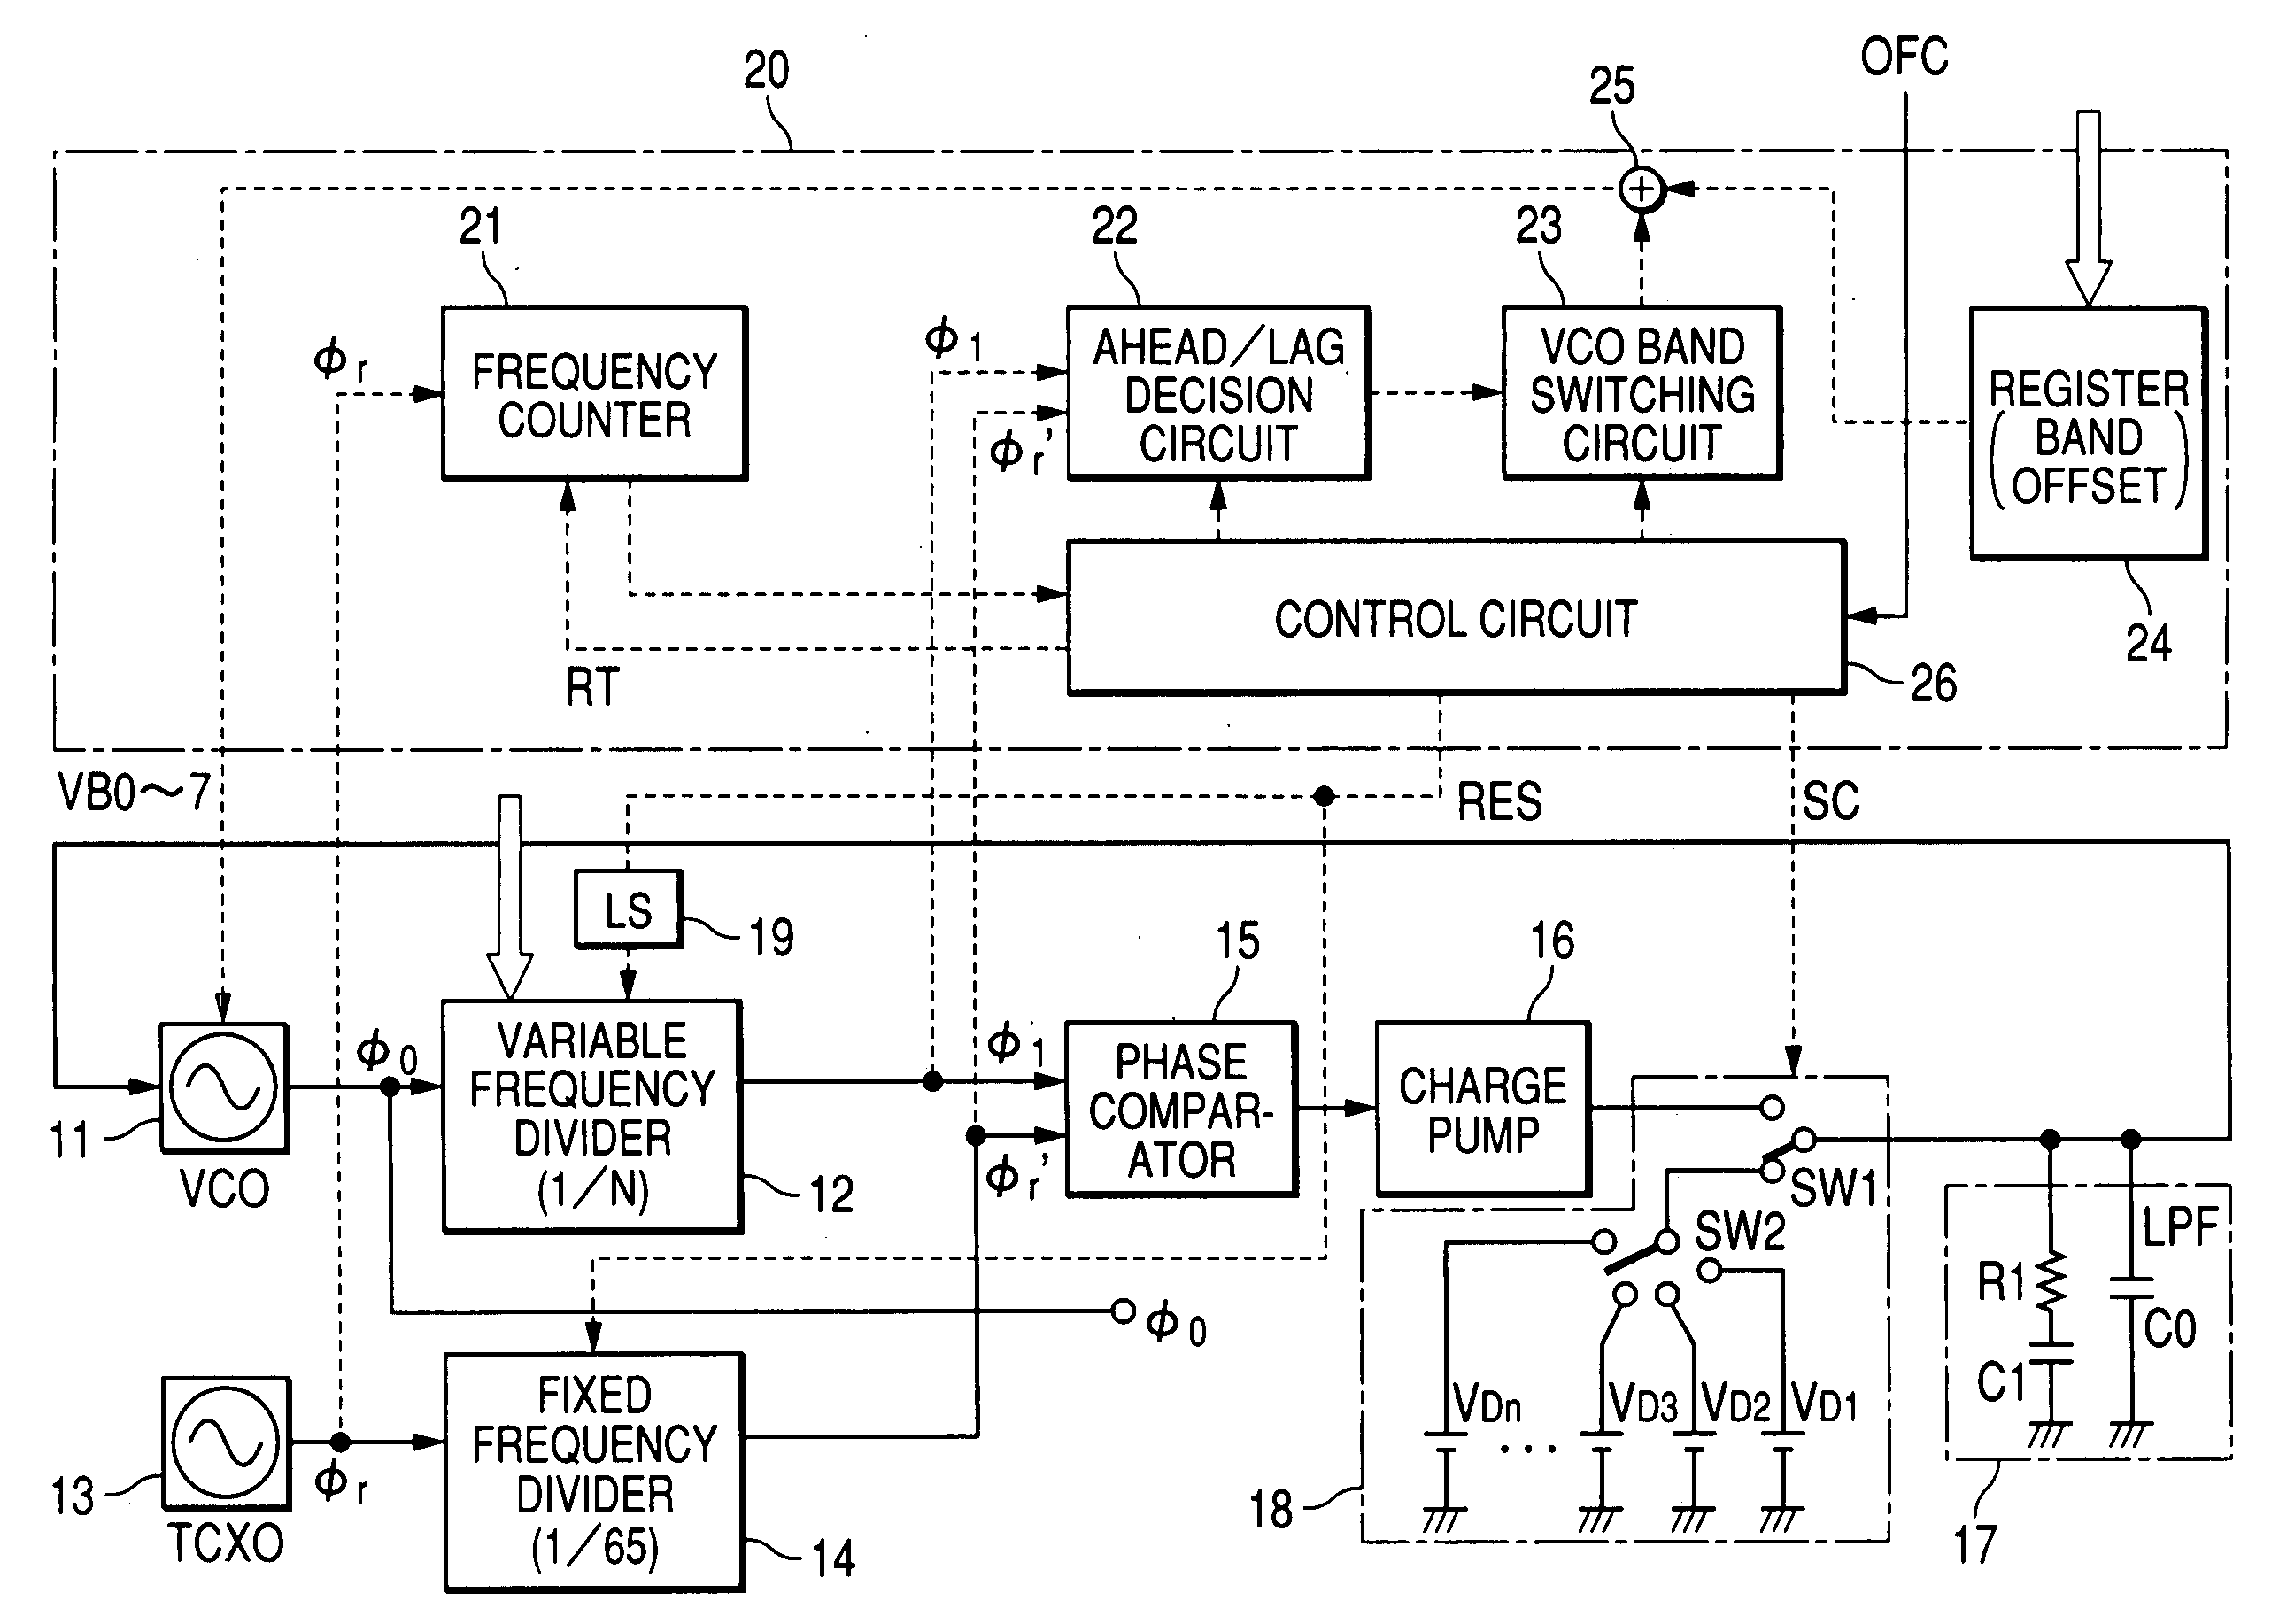 Semiconductor integrated circuit for communication